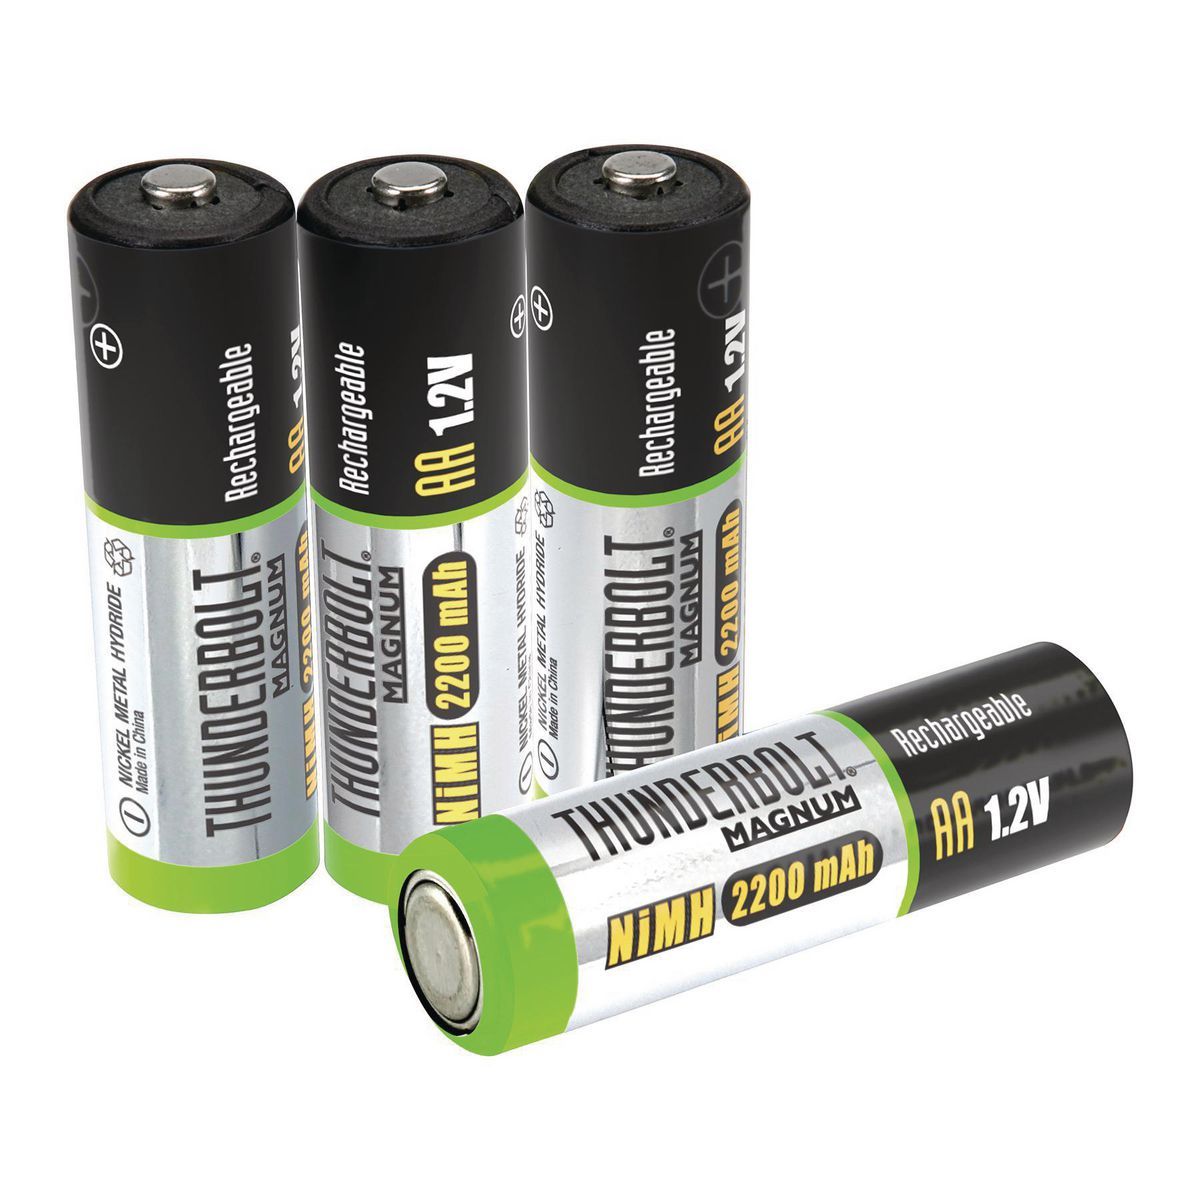 THUNDERBOLT MAGNUM Pack of 4 High Capacity NiMH Rechargeable AA Batteries